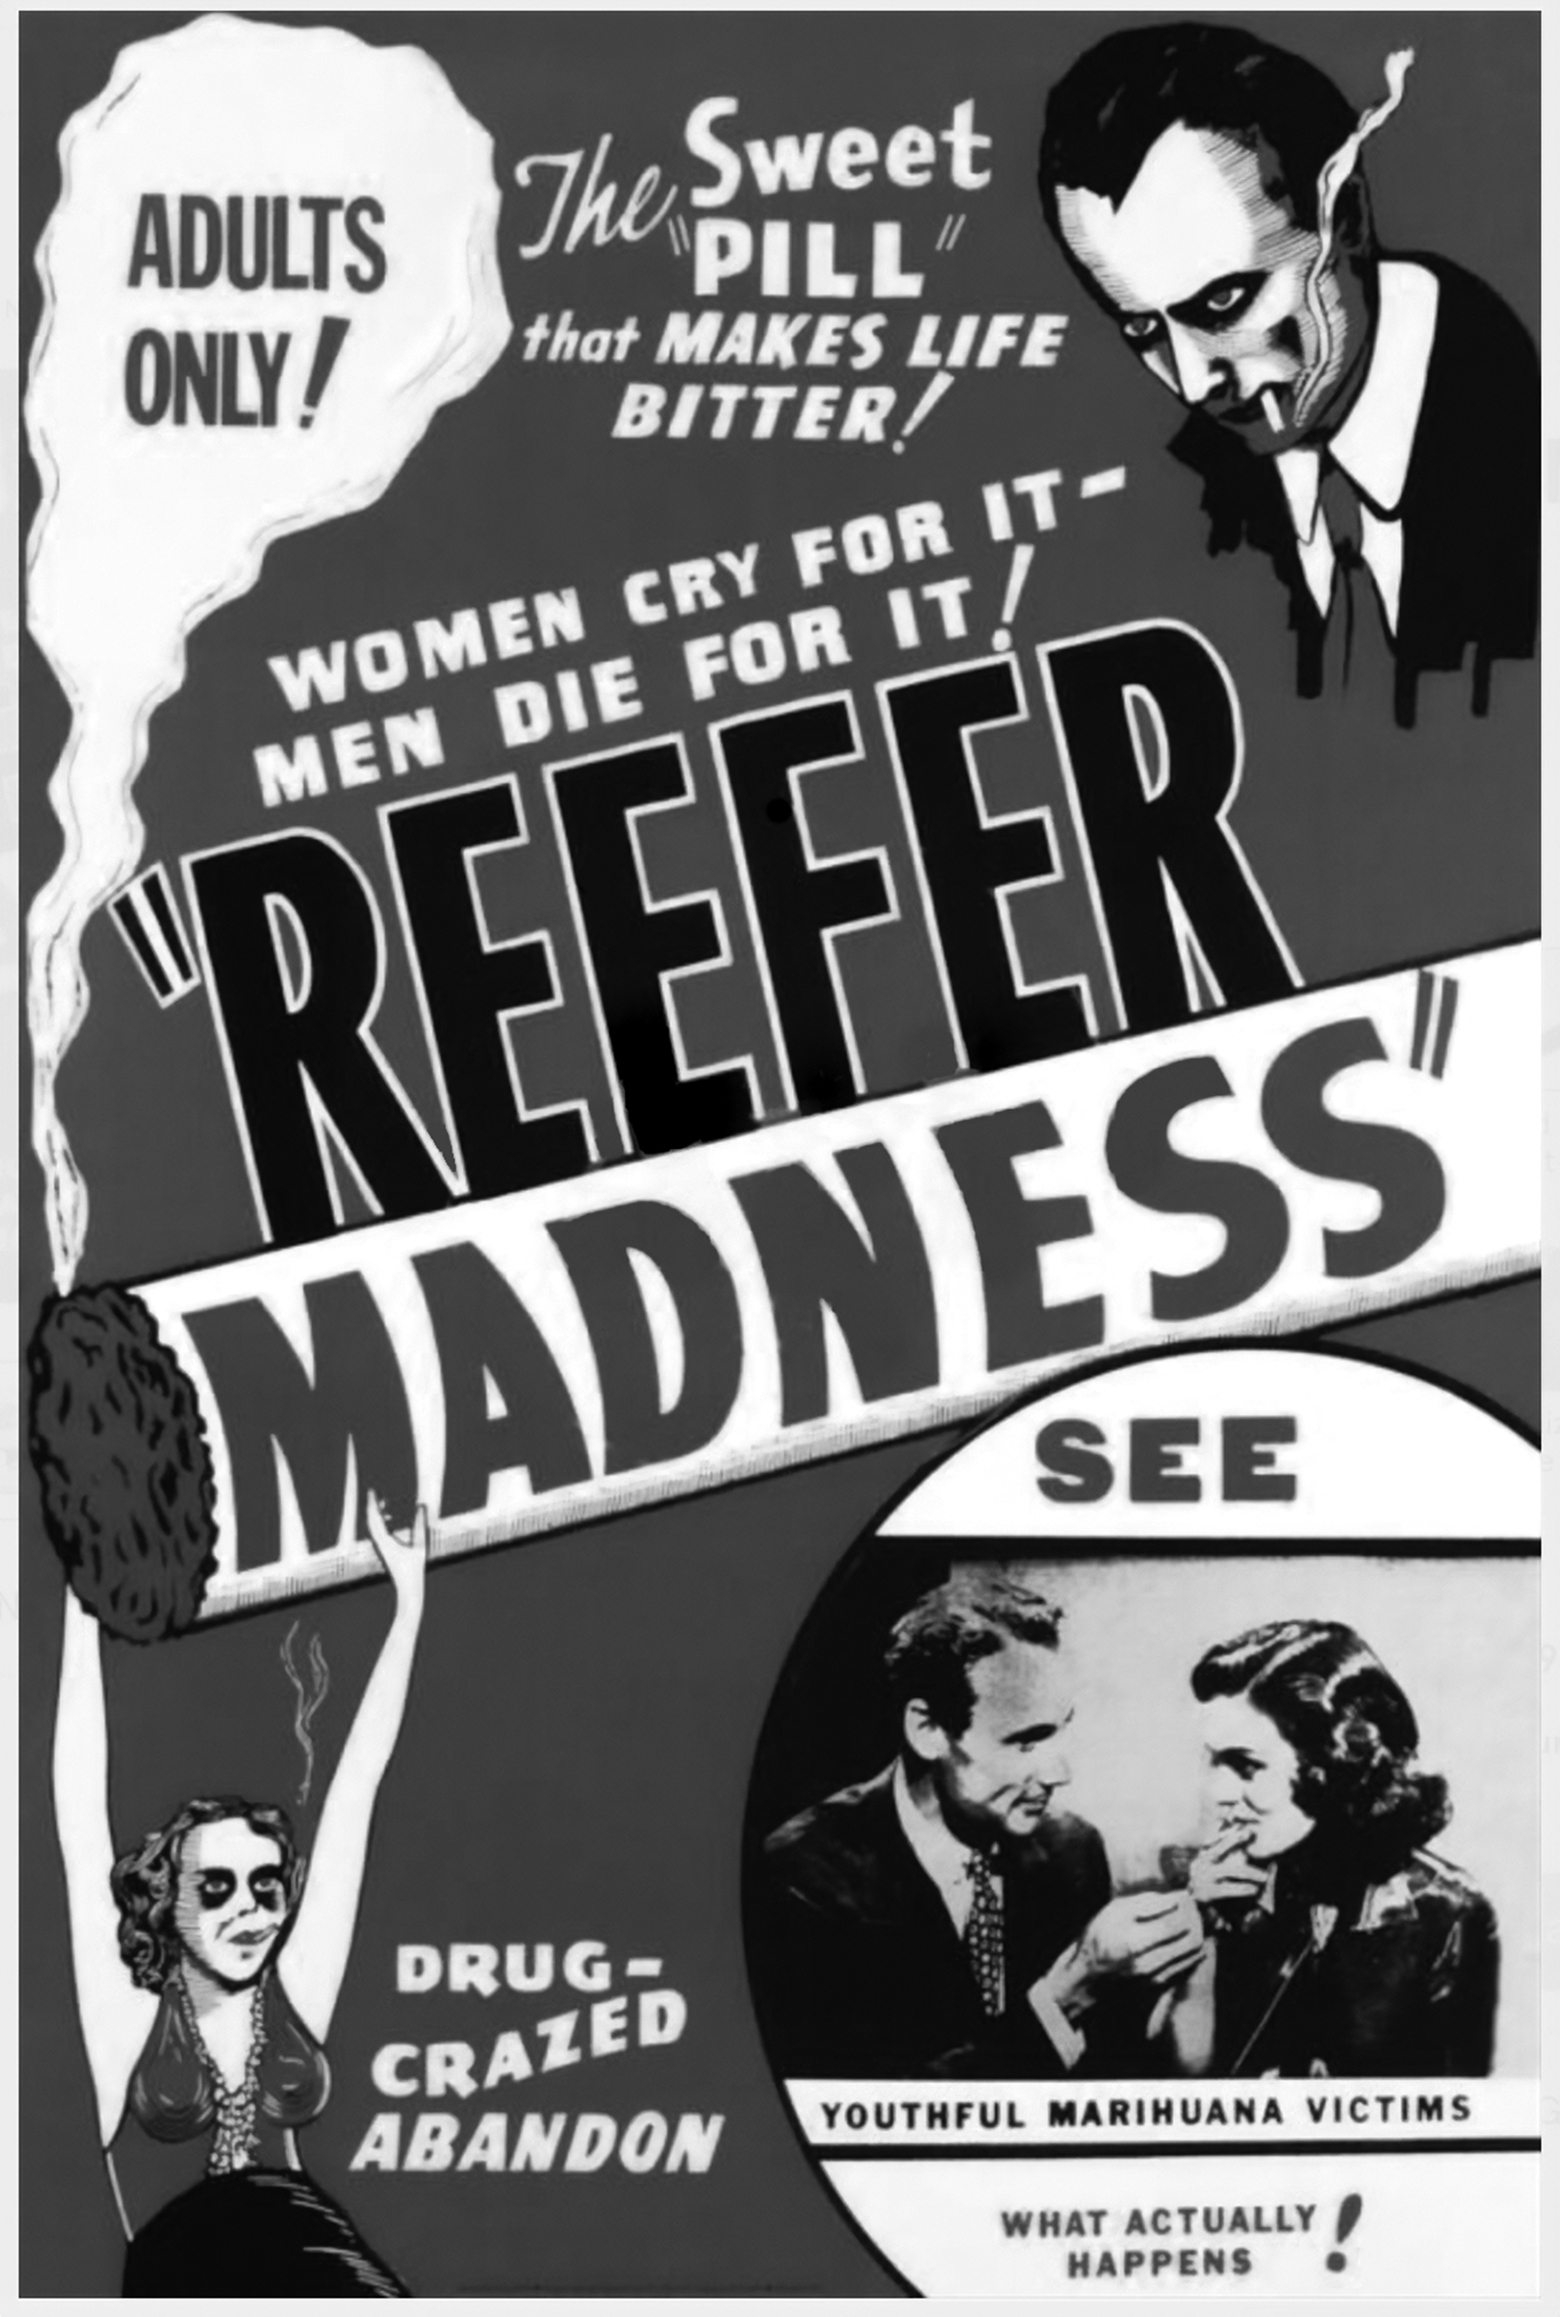 Poster for the 1972 rerelease of an anti-cannabis propaganda film (“Reefer Madness”) from the 1930s.